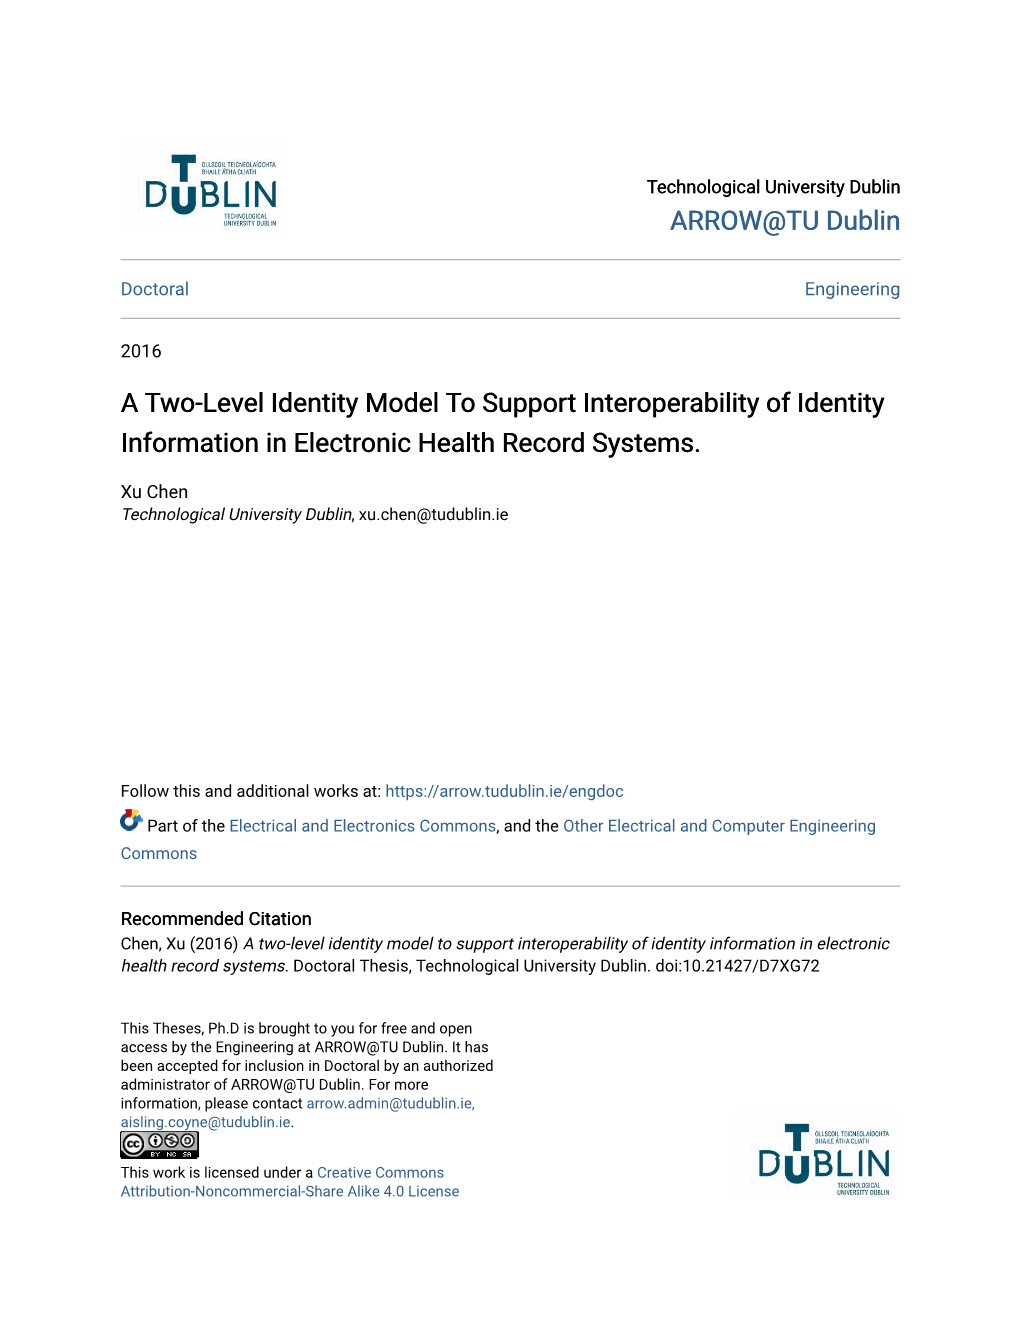 A Two-Level Identity Model to Support Interoperability of Identity Information in Electronic Health Record Systems